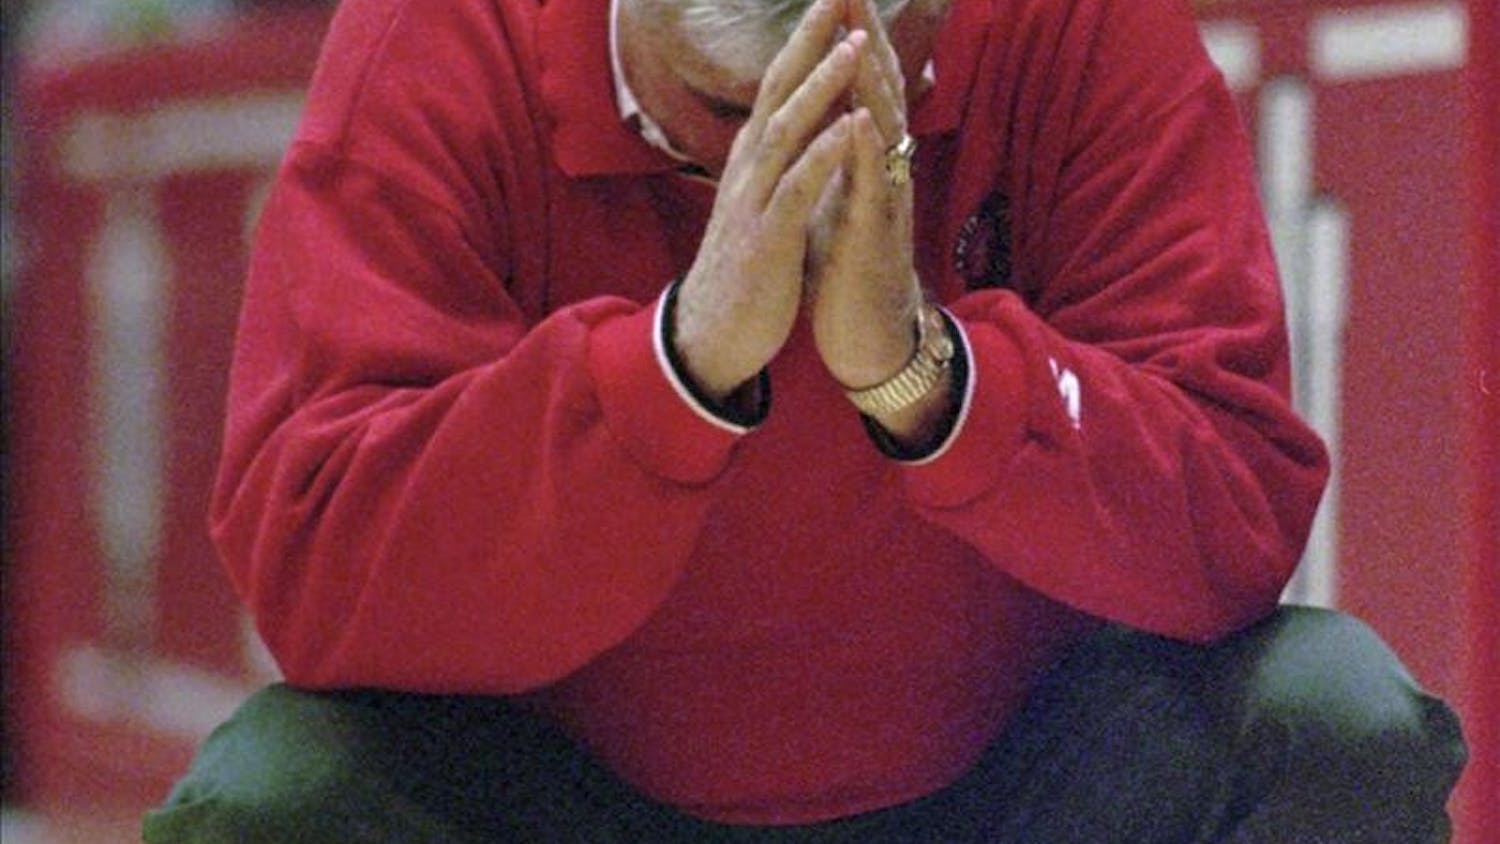 Indiana coach Bobby Knight crouches down in frustration as his team relinquishes their lead in the final minutes against Illinois, in this February 2, 1997 photo, in Bloomington, Ind. 